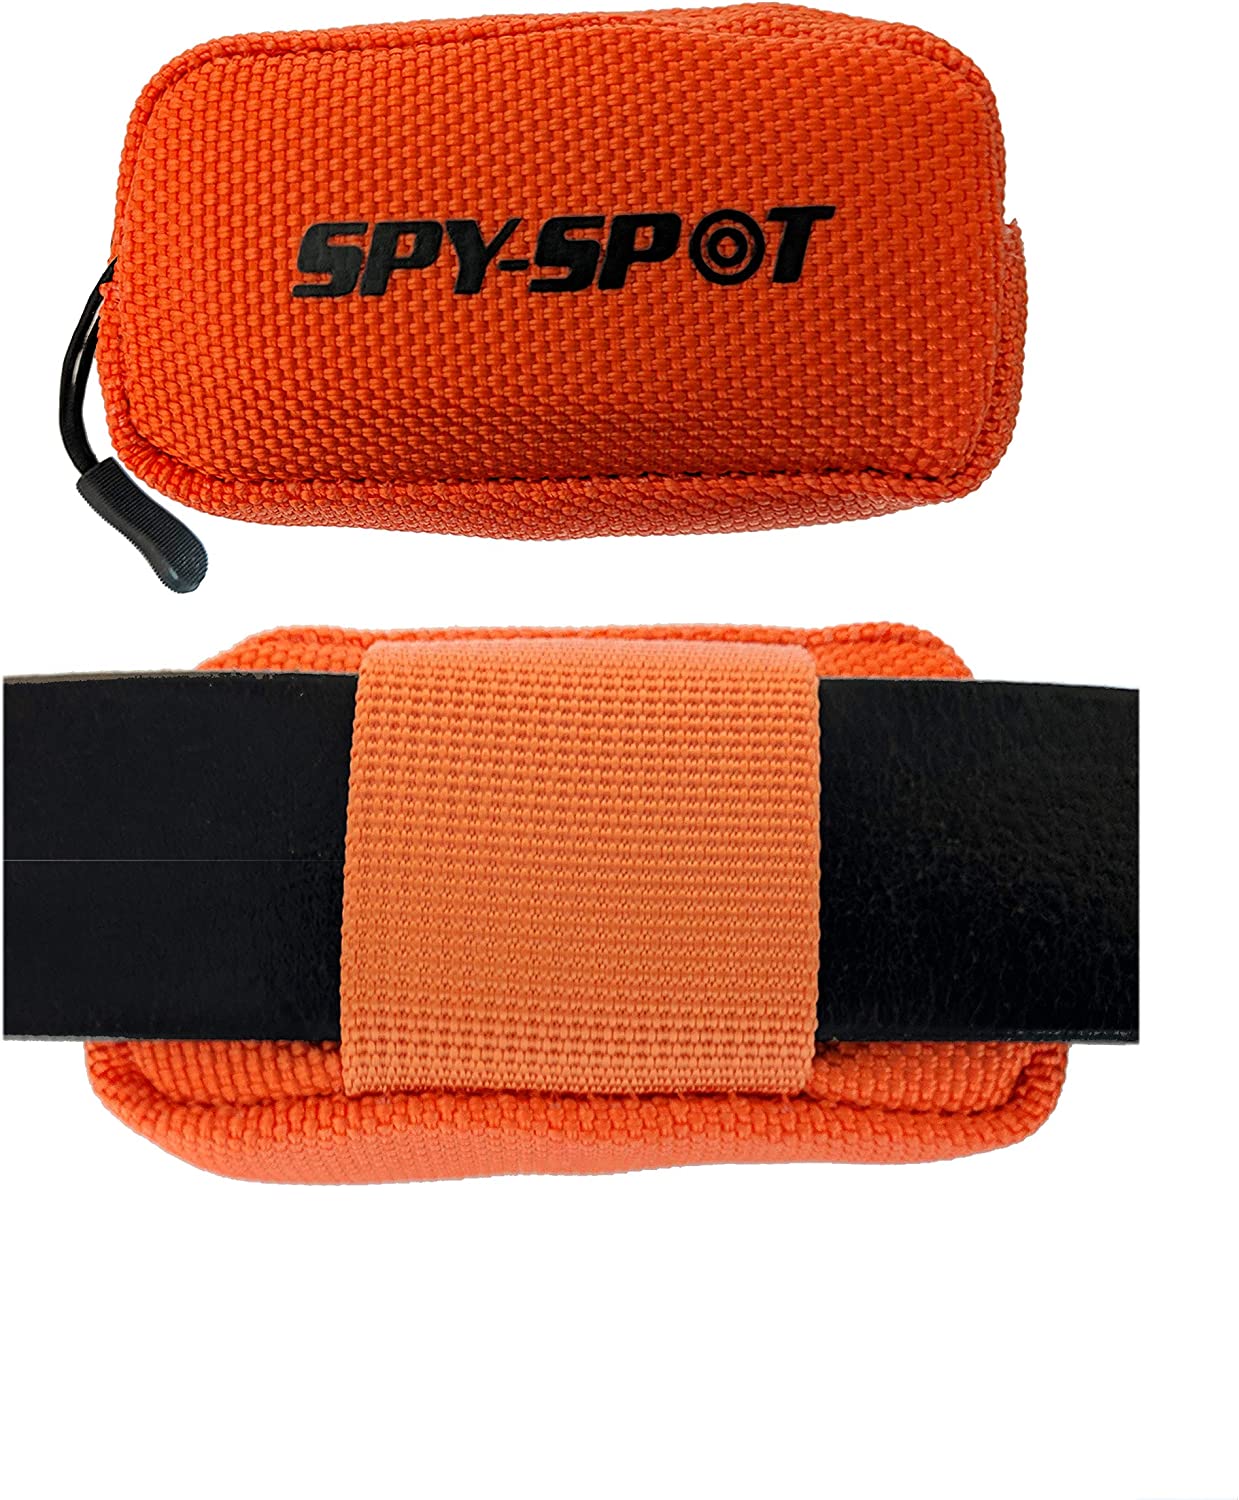 Spy Spot Waterproof Small Pouch with Zipper - Oxford Thick Fabric - Multi-purpose Bag with Loop Attachment - GPS Tracker Case, Dog Collar Pouch